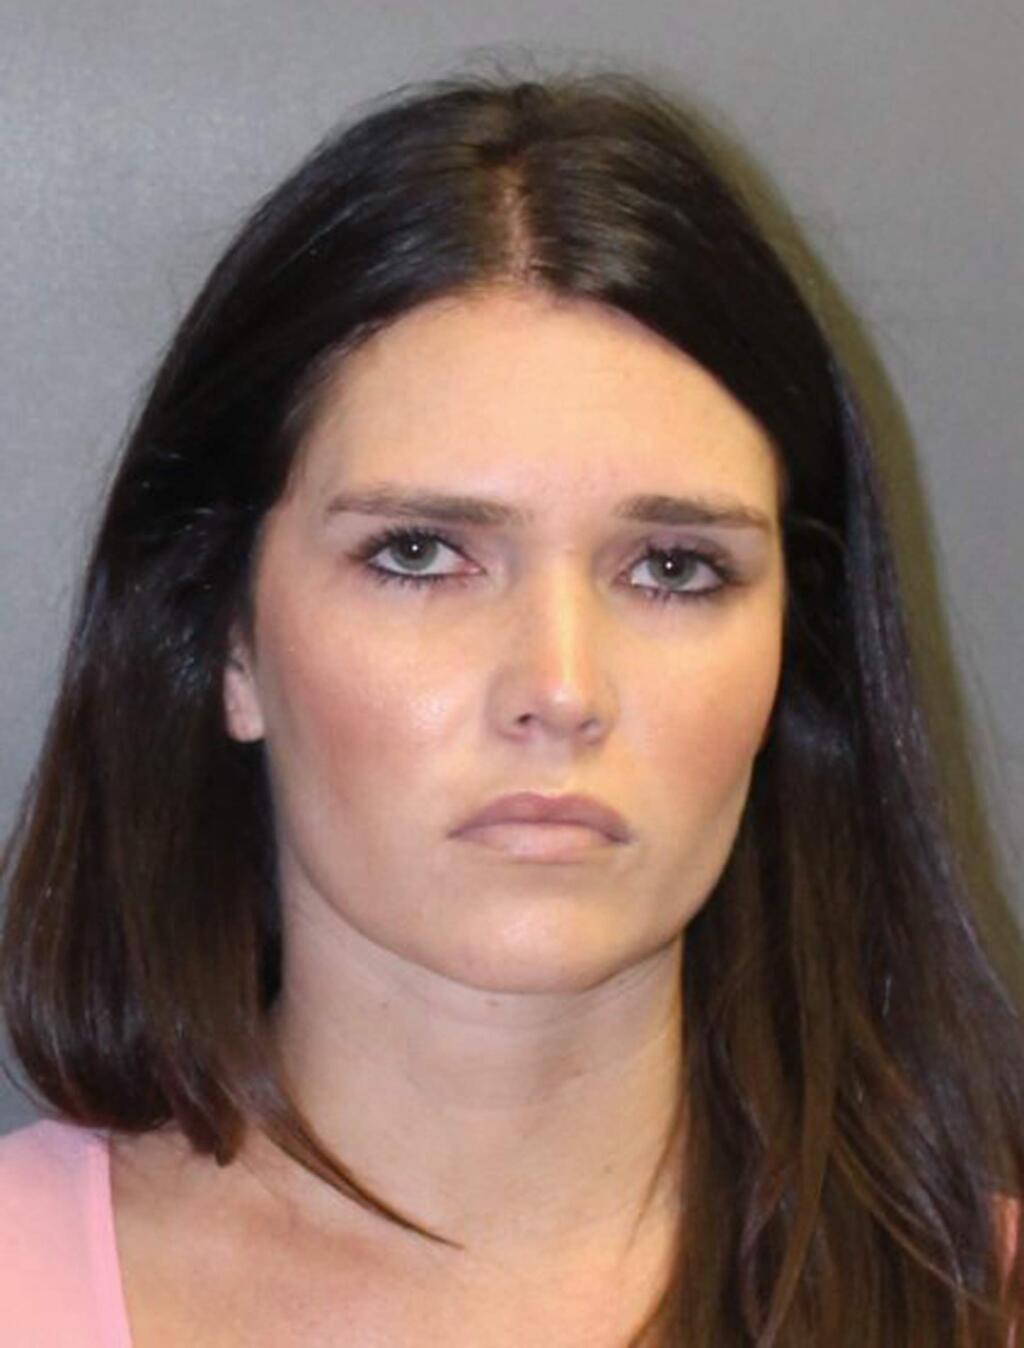 This undated booking photo provided by the Newport Beach, Calif., Police Department shows Cerissa Laura Riley, 31. She and a co-defendant, Grant W. Robicheaux, 38, a California doctor who appeared in a reality TV dating show, have been charged with drugging and sexually assaulting two women, and authorities suspect there may be many more victims. Orange County District Attorney Tony Rackauckas announced charges Tuesday, Sept. 18, 2018, against Robicheaux of Newport Beach and Riley of Brea. (Newport Beach Police Department via AP)